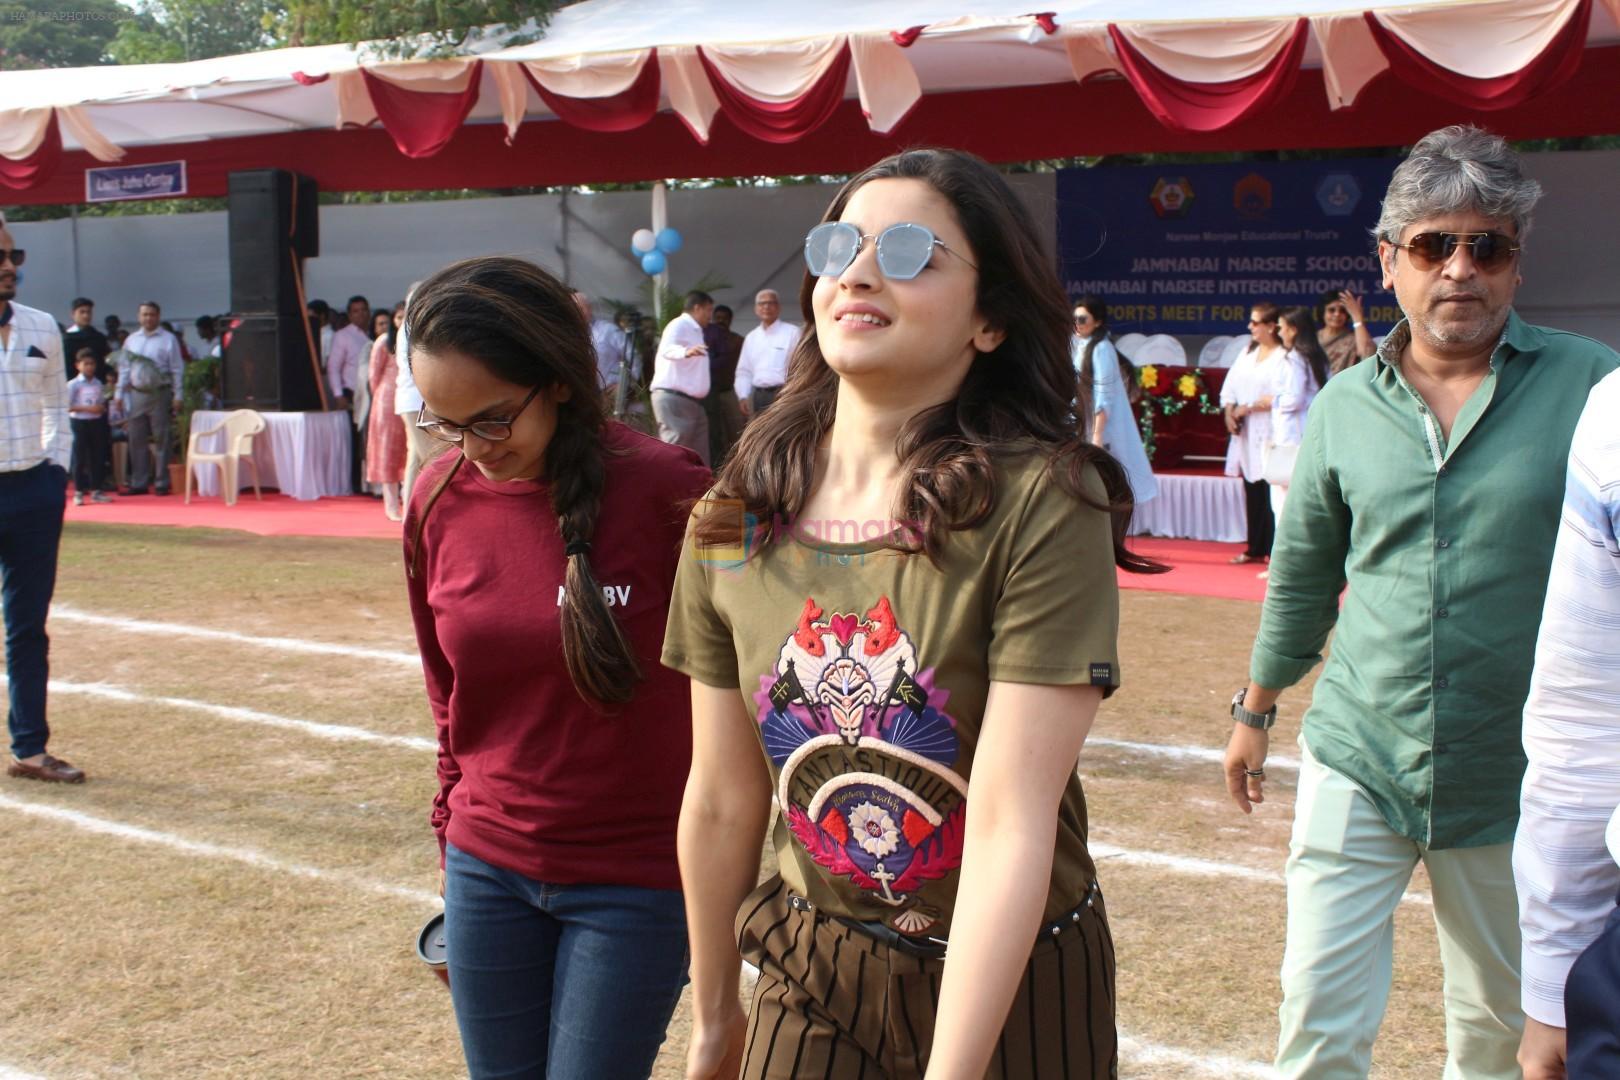 Alia Bhatt At Narsee Monjee Educational Trust Sports Meet For Special Children on 18th Dec 2017